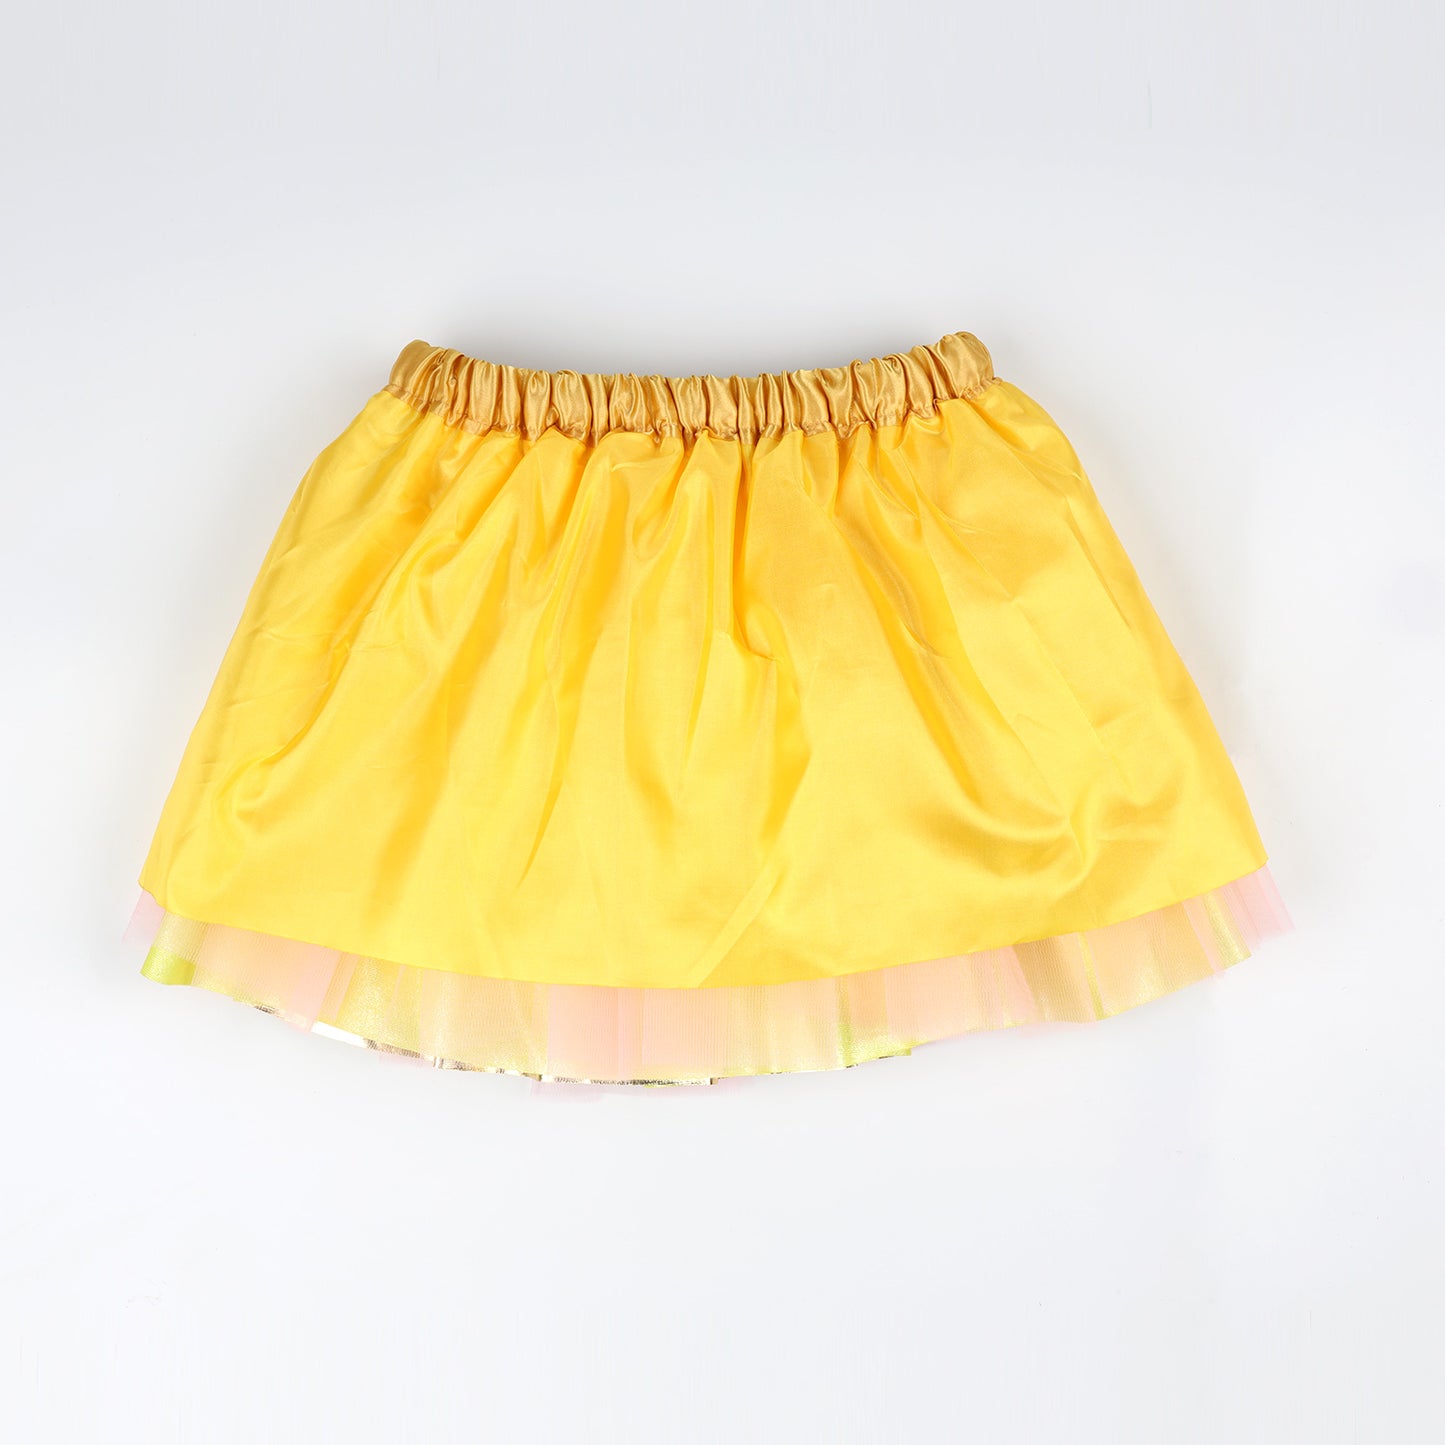 Toddler and Little Girls 3 Layers Sparkling Tutu Skirt with Bowknot Headband